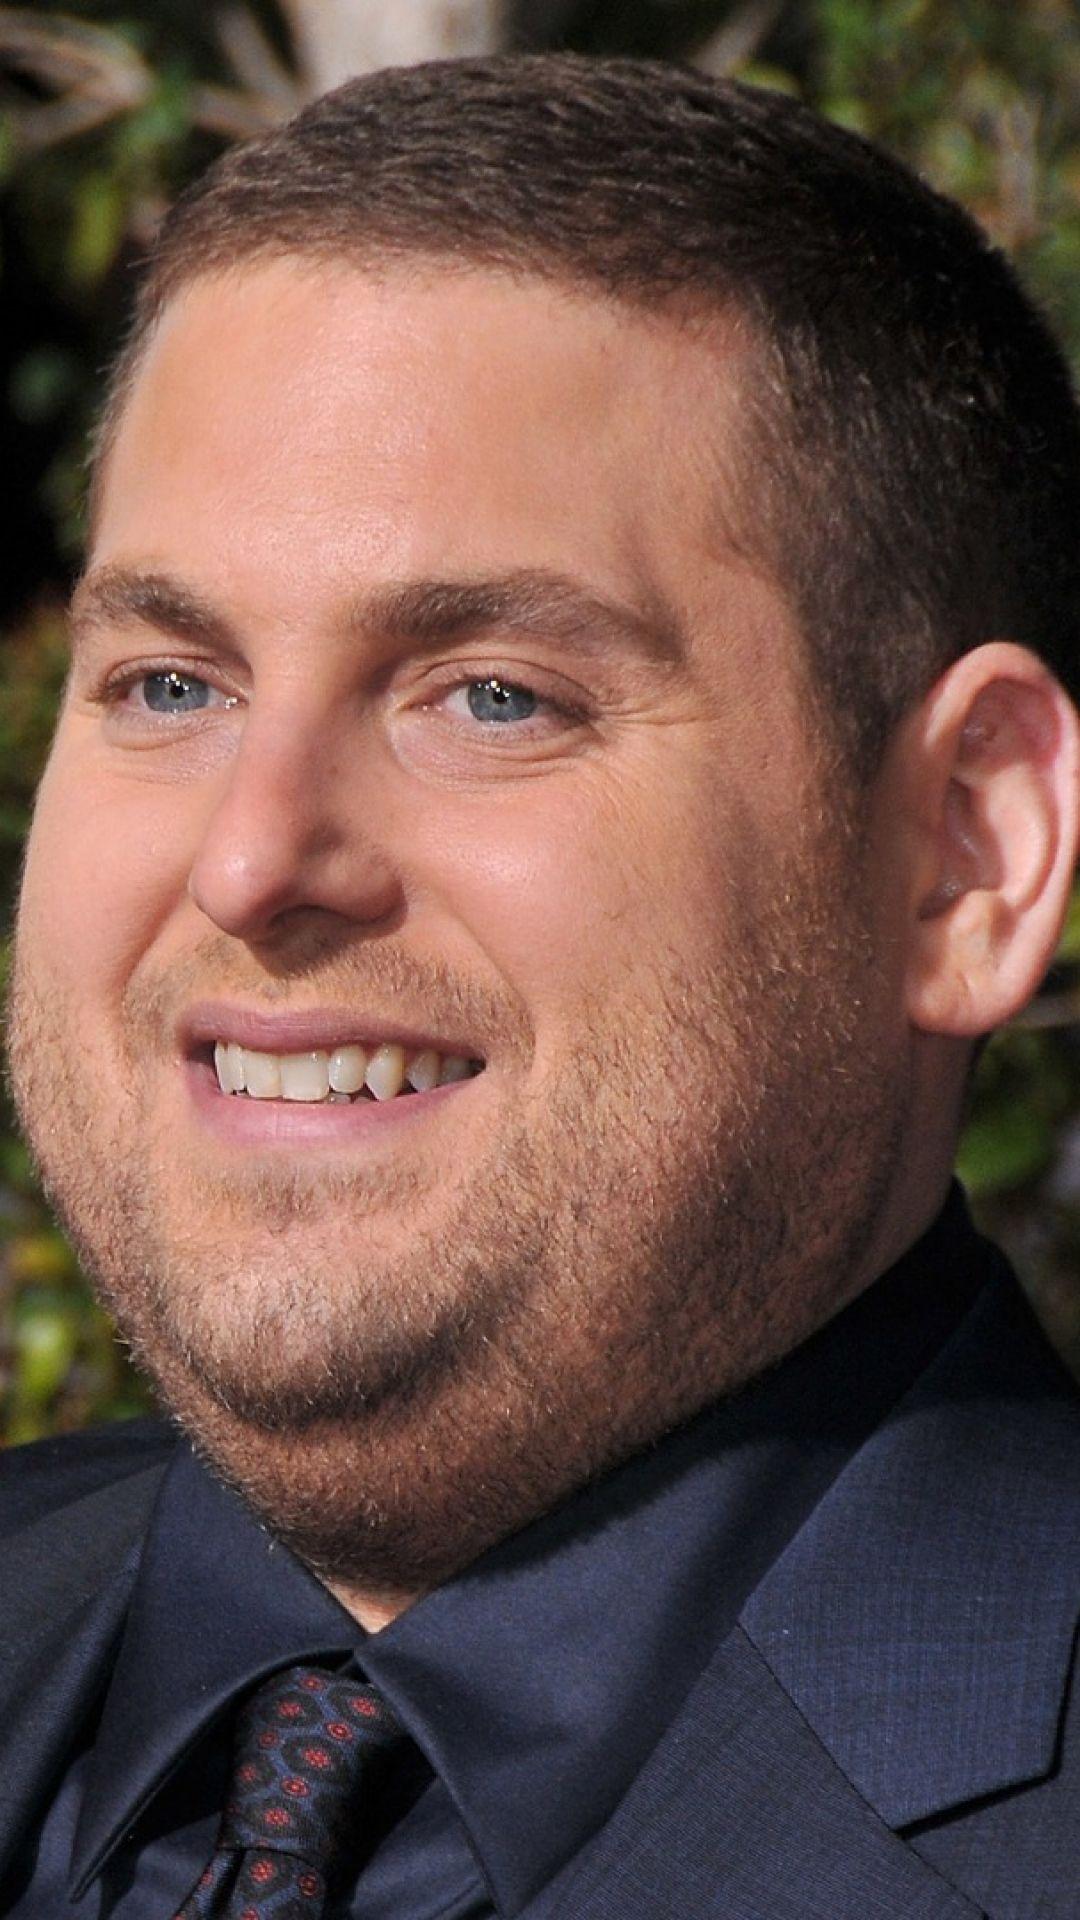 Download Wallpaper 1080x1920 Jonah hill, Actor, Smile Sony Xperia